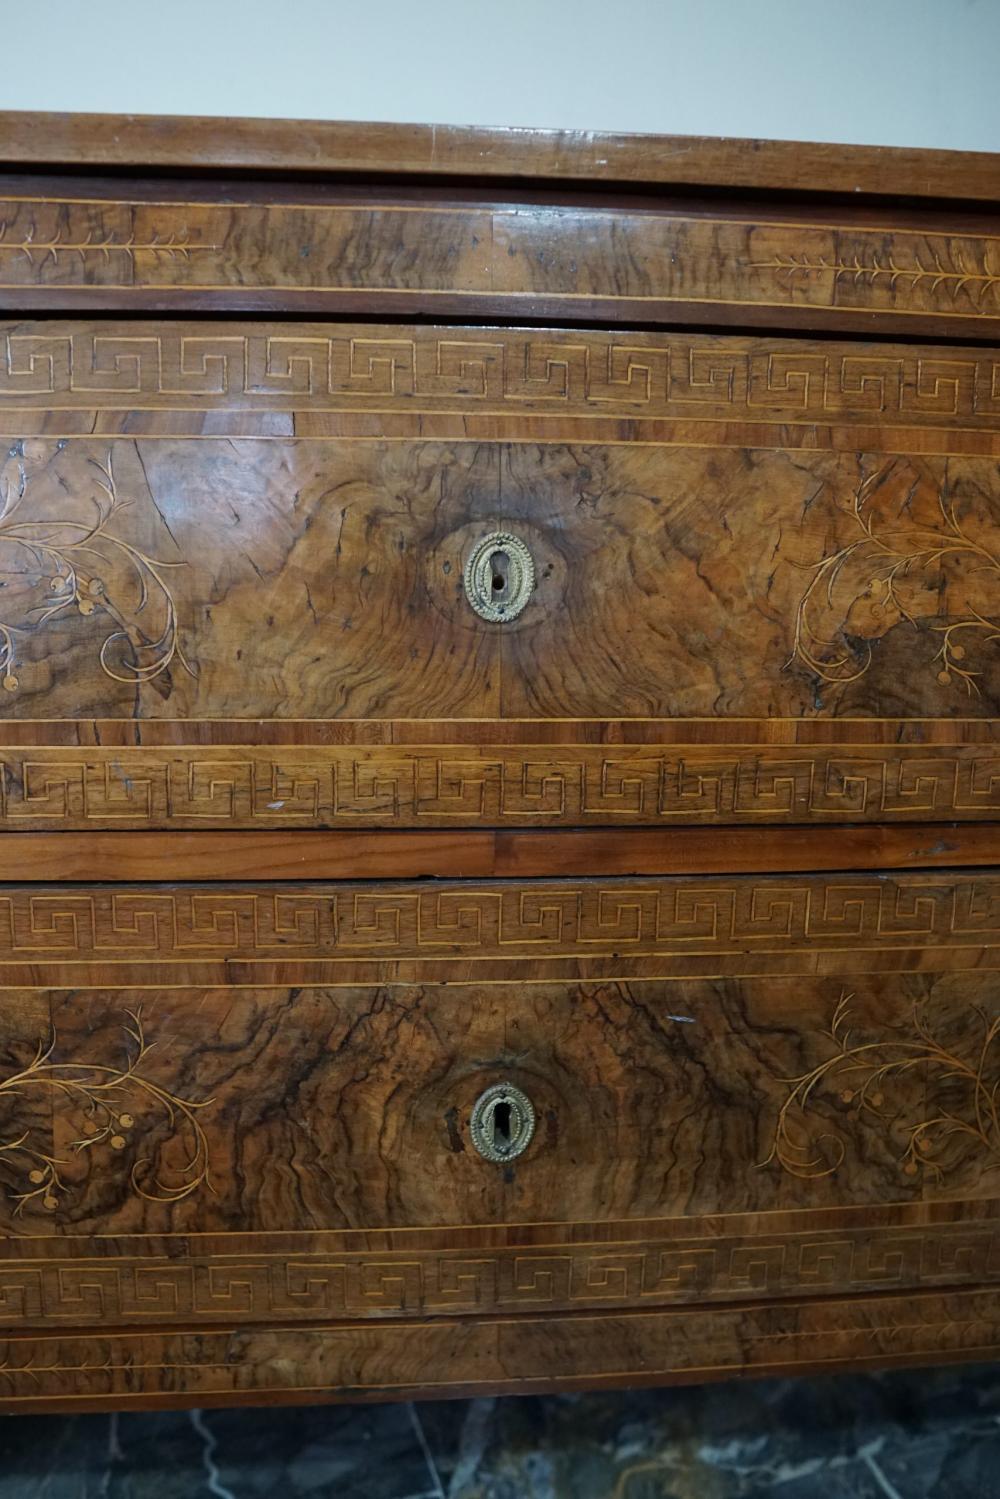 Louis XVI chest of drawers, with inlaid, Lombard, 18th century, a lock that closes both drawers, rare and completely original. Dimensions: 90 x 135 x 60cm. Good condition - used with small signs of aging & blemishes. Additional photos and